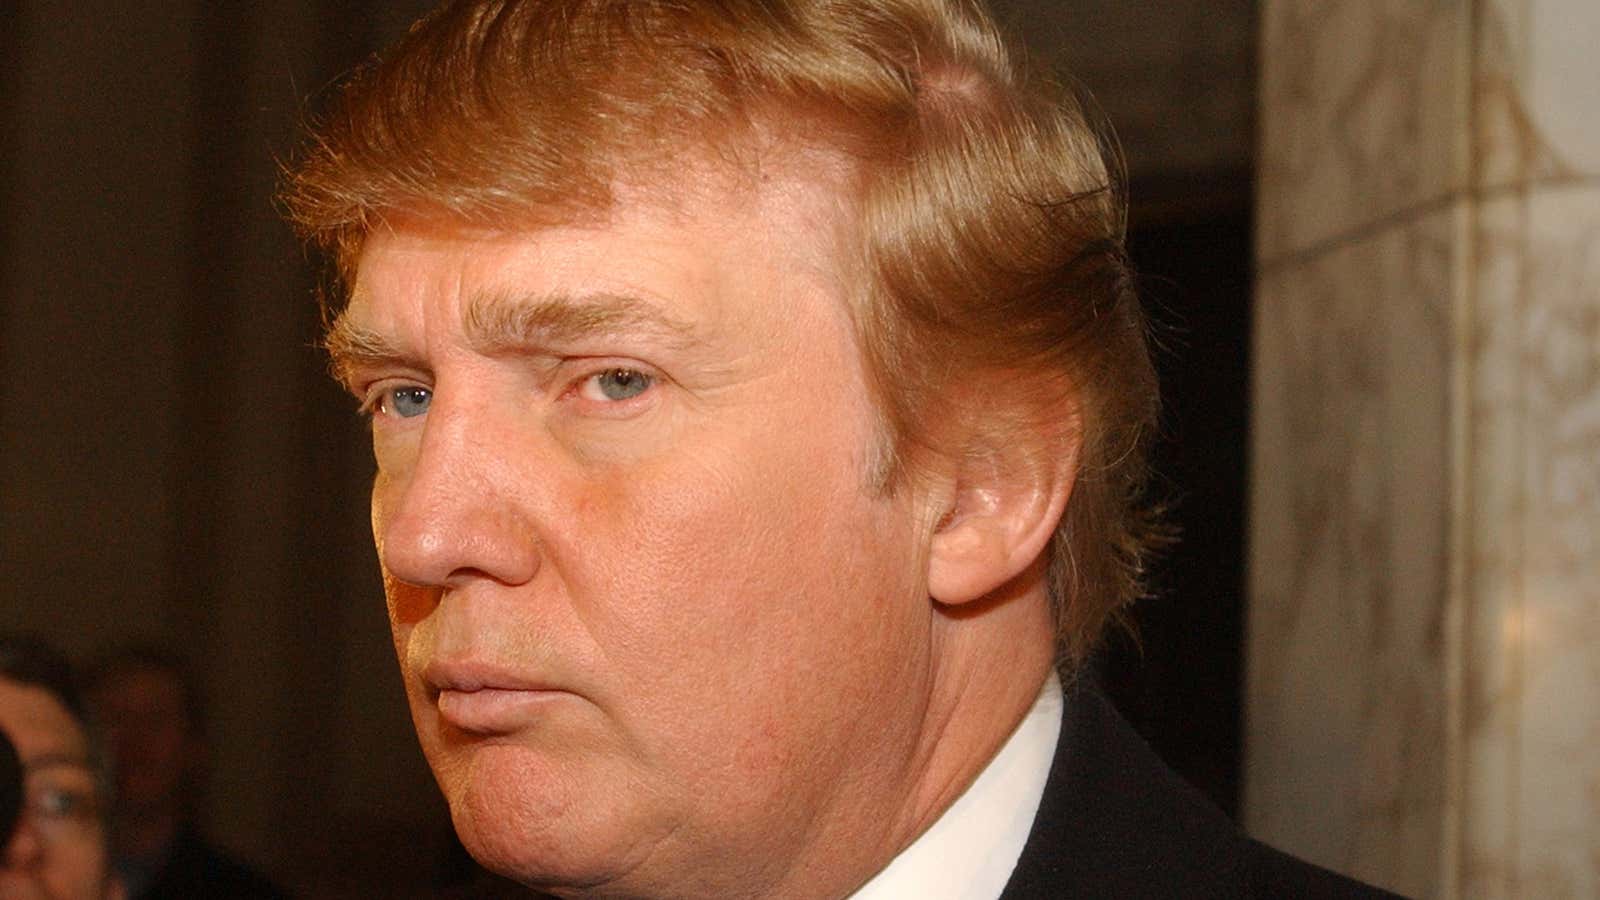 Trump in 2005, with the look of a man who has paid  $31 million too much.